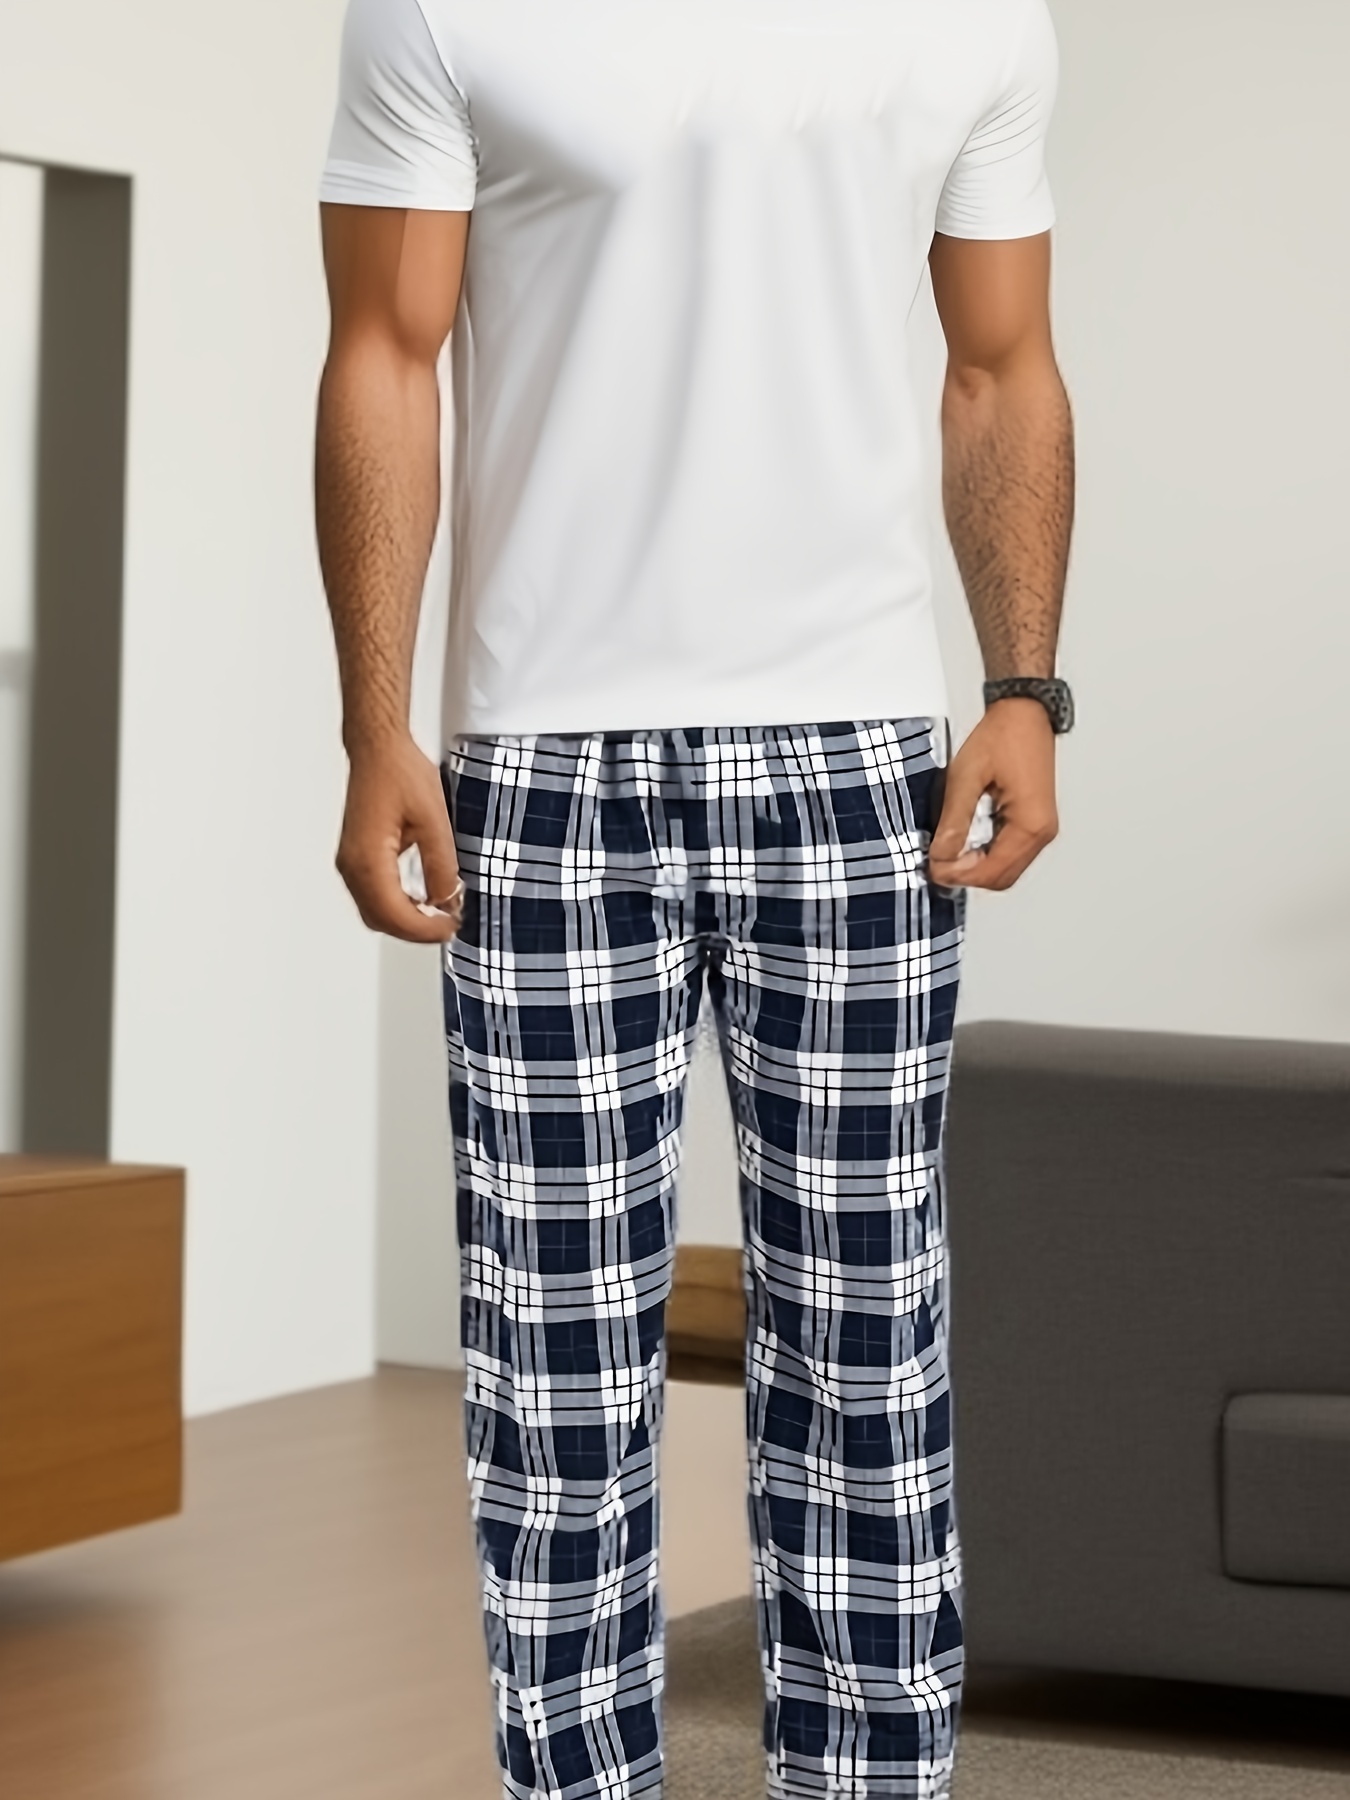 Pronto Uomo Relaxed Fit Top And Pants Pajama Set, Men's